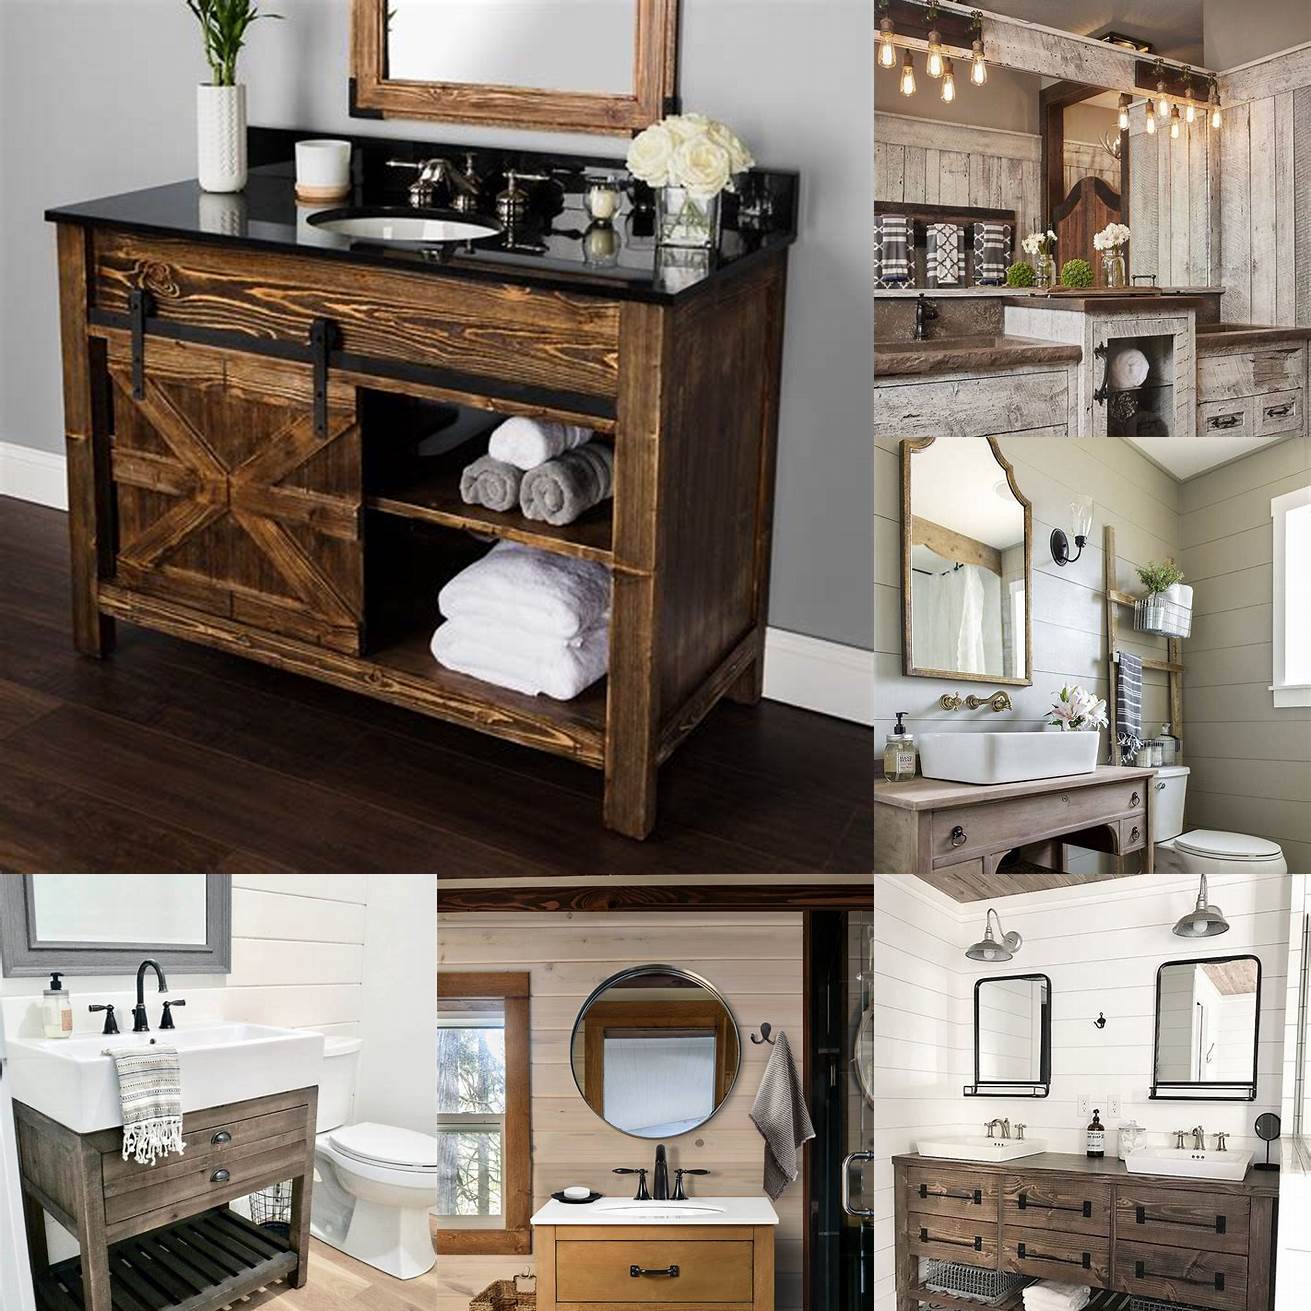 A rustic farmhouse bathroom vanity can add a cozy and charming touch to your bathroom